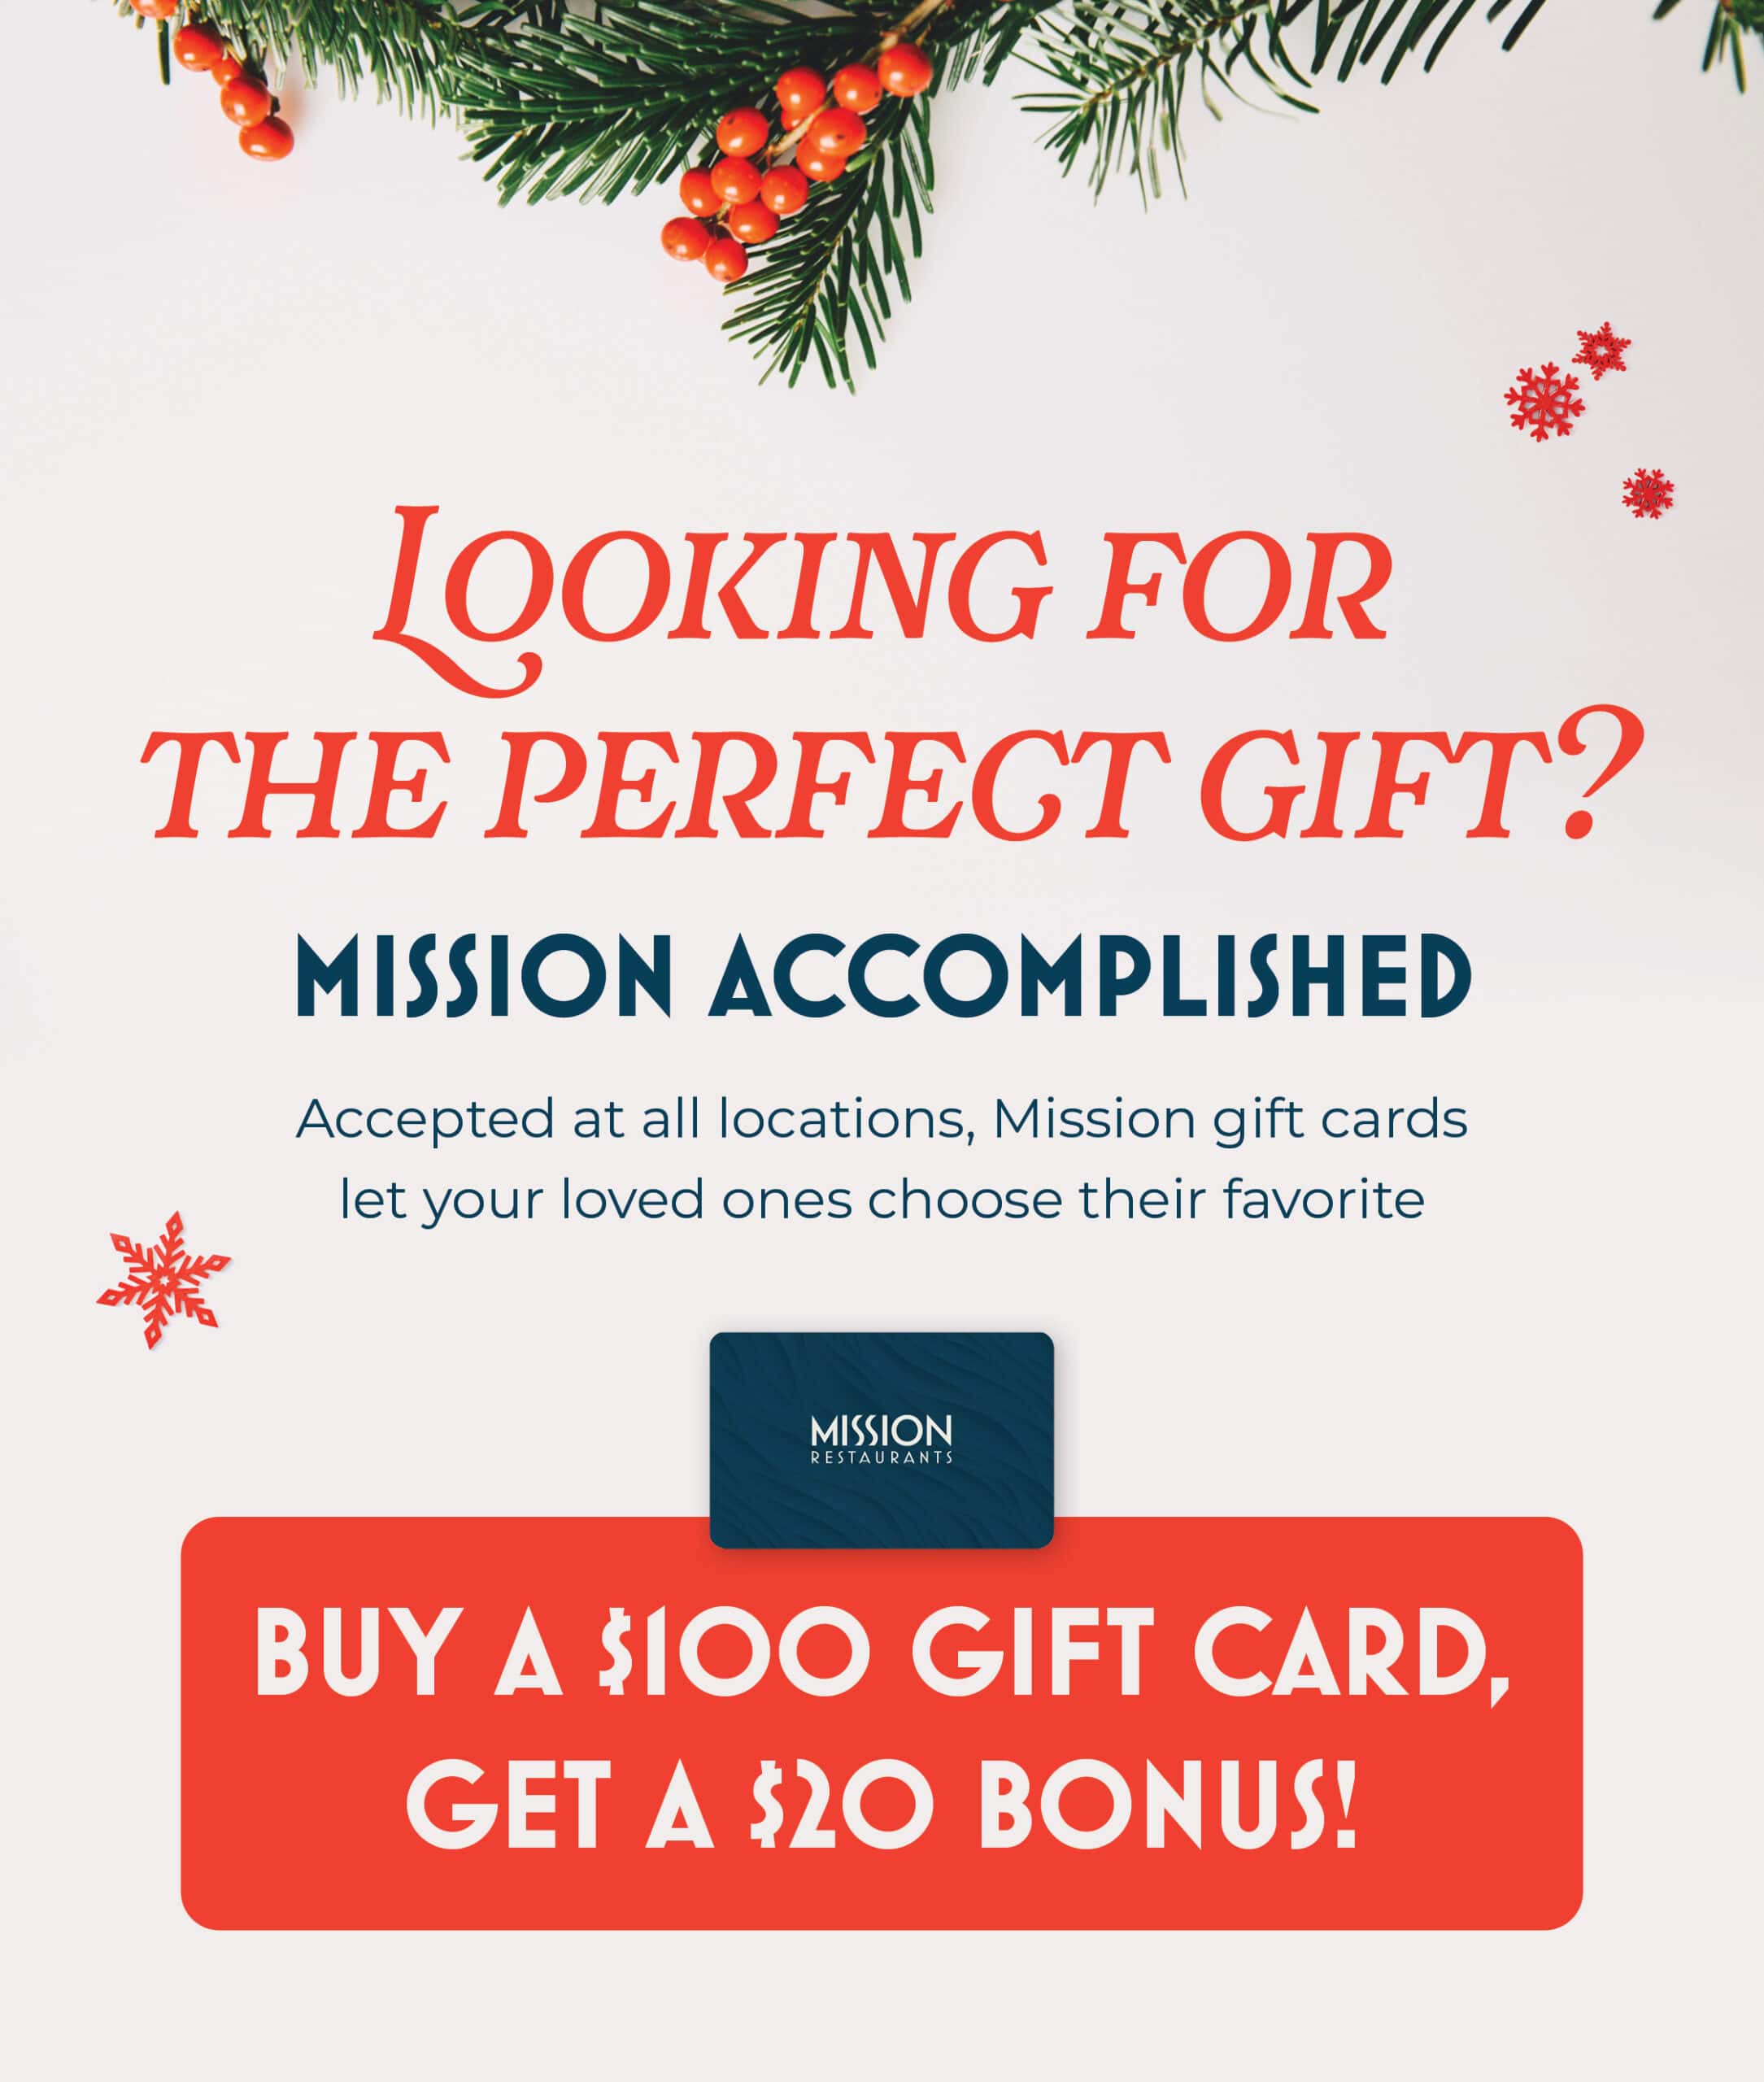 Looking for the perfect gift? Mission Accomplished. Buy a $100 gift card, get a $20 bonus